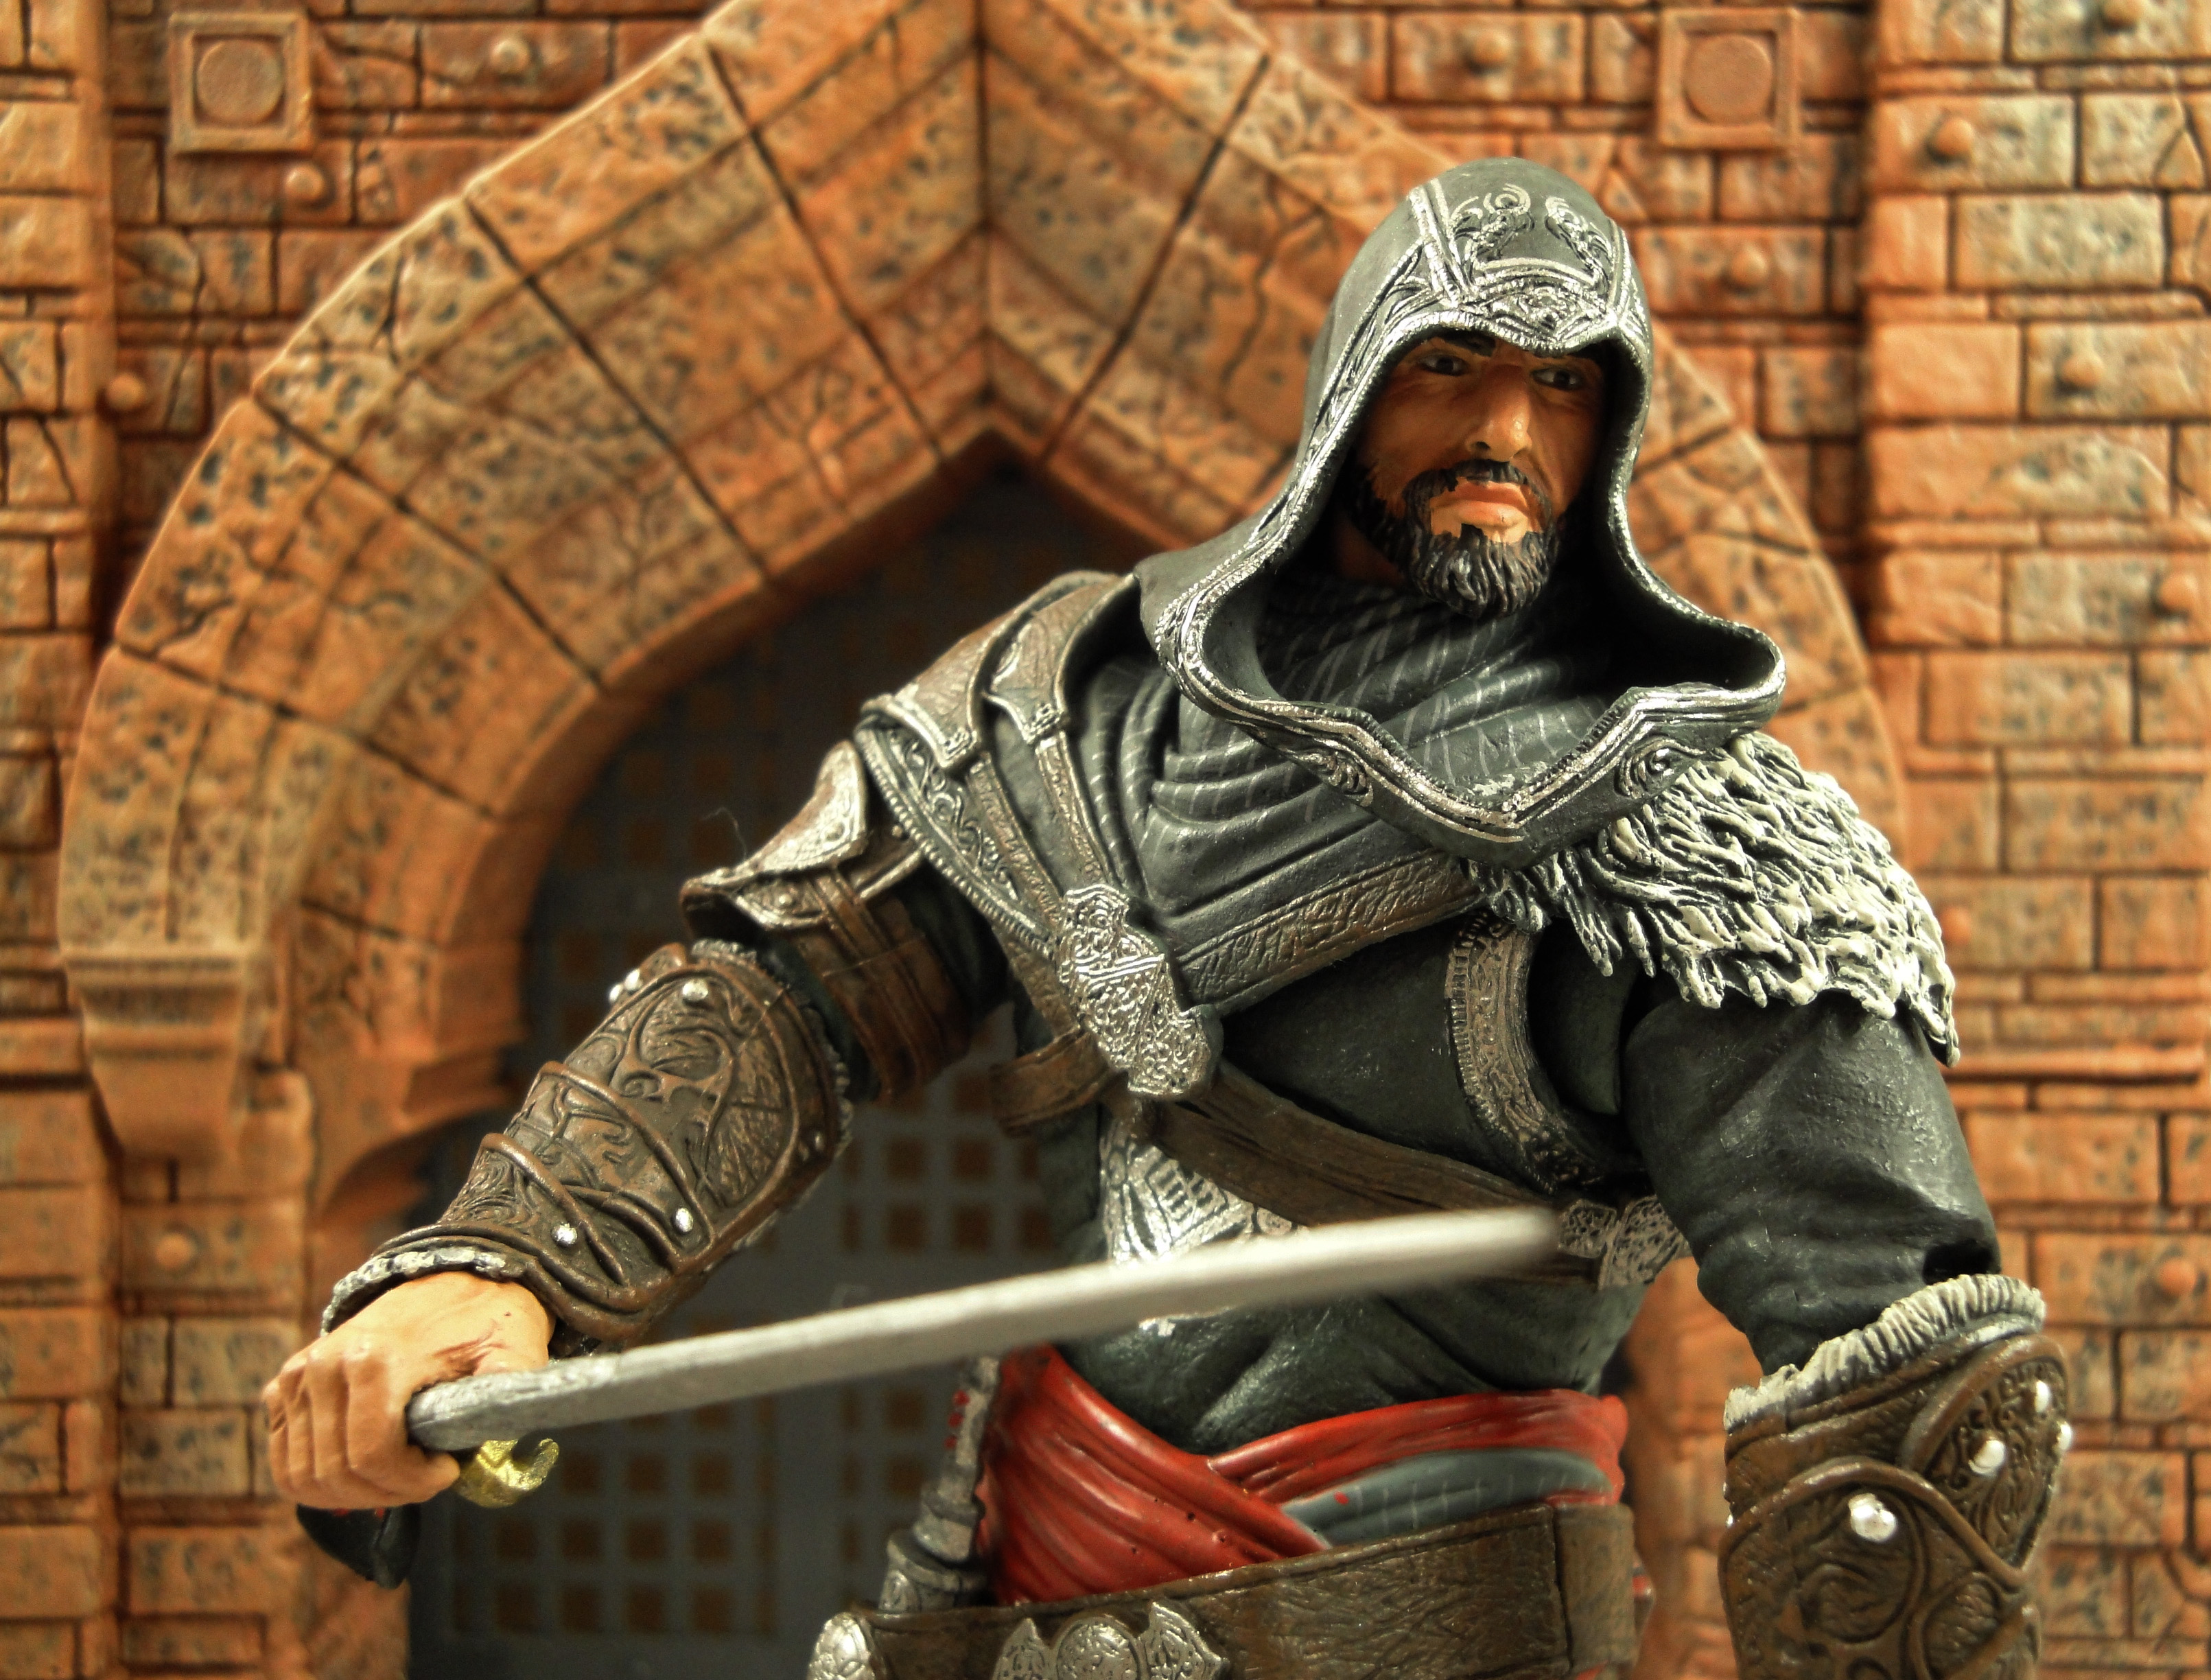 Assassin's Creed: Revelations – review, Assassin's Creed